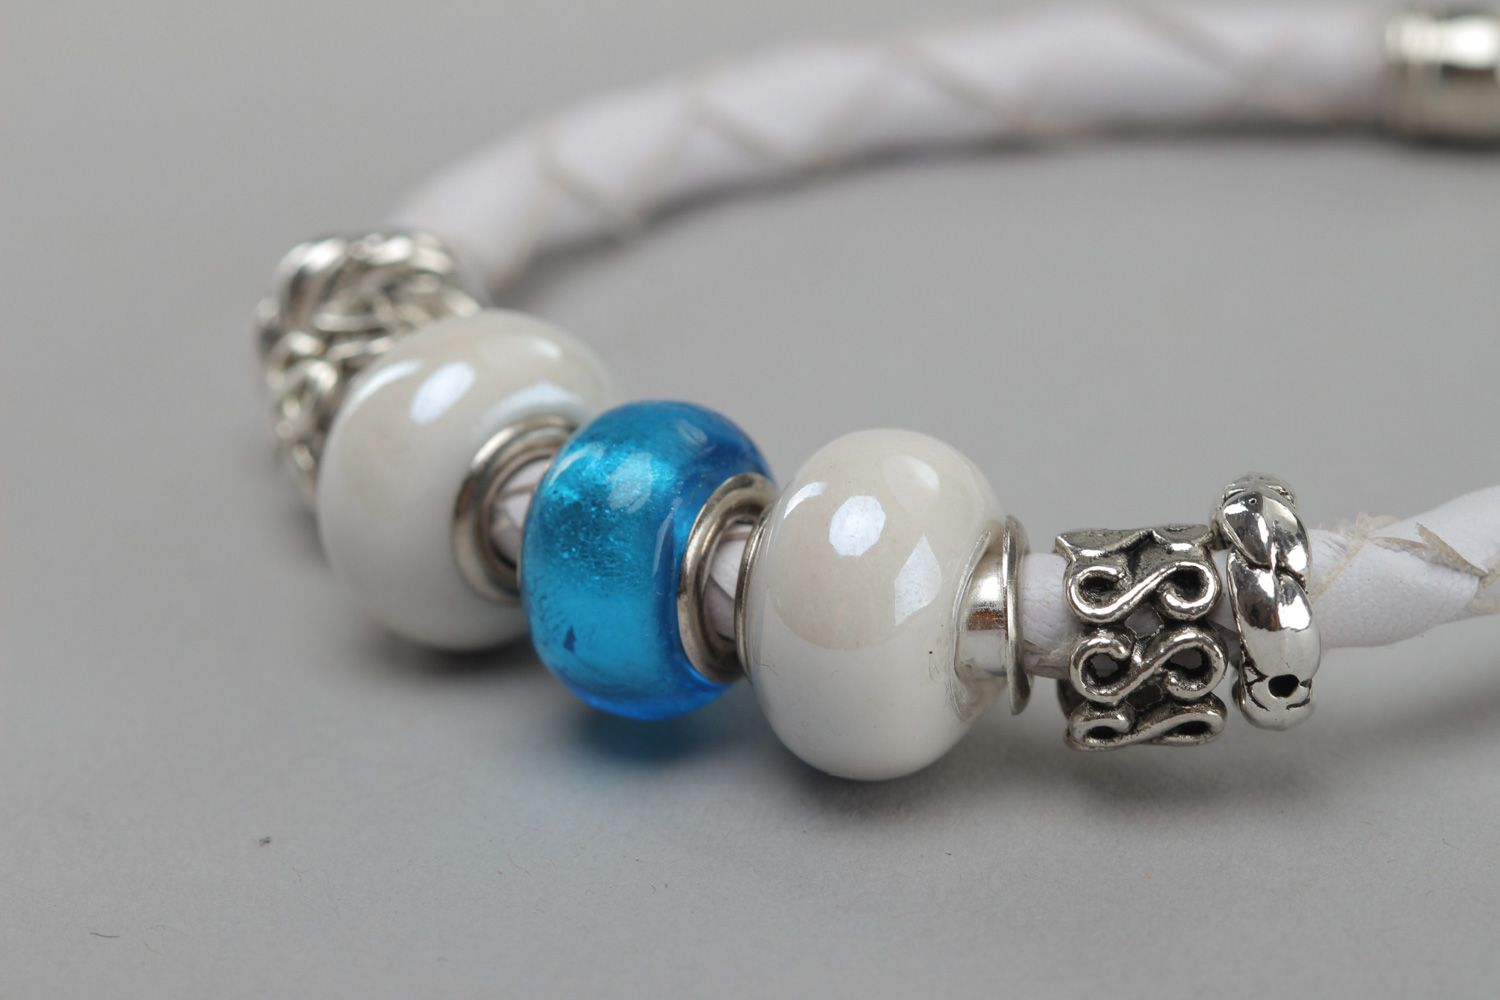 Tender handmade wrist bracelet woven of white faux leather with beads for women photo 3